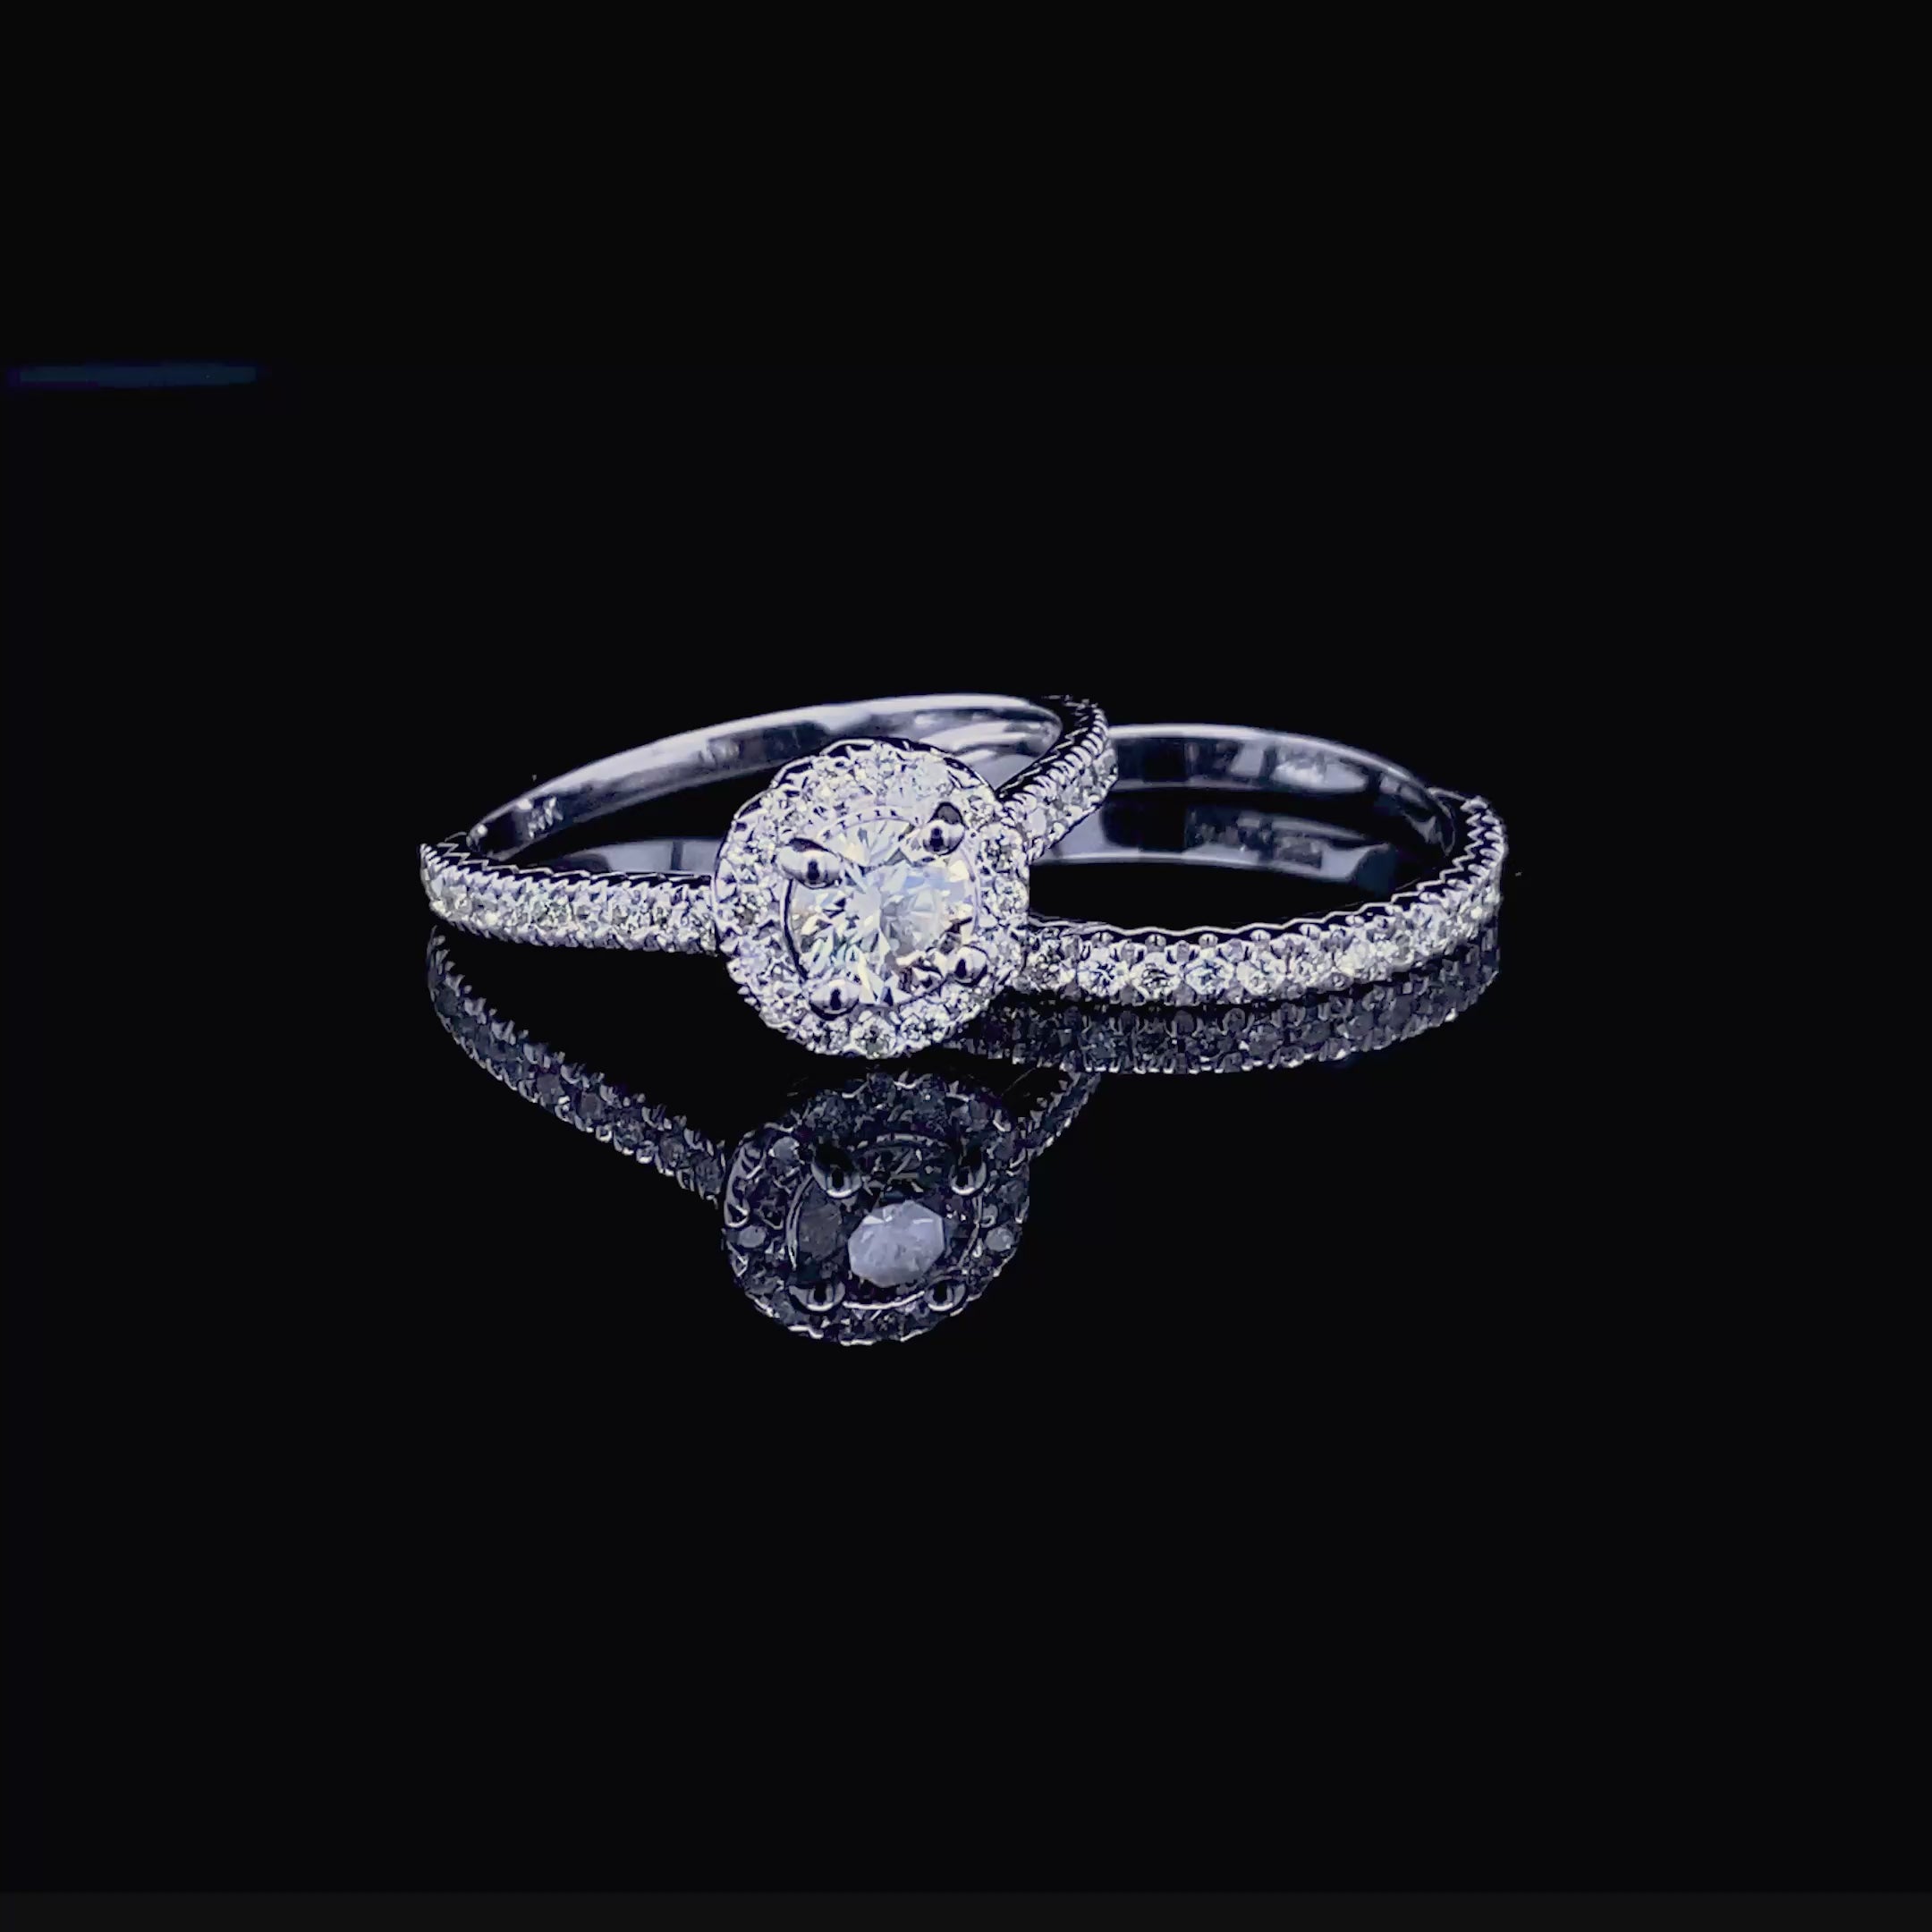 Special 1.25 CT Round Cut Diamond Bridal Set in 14KT White Gold